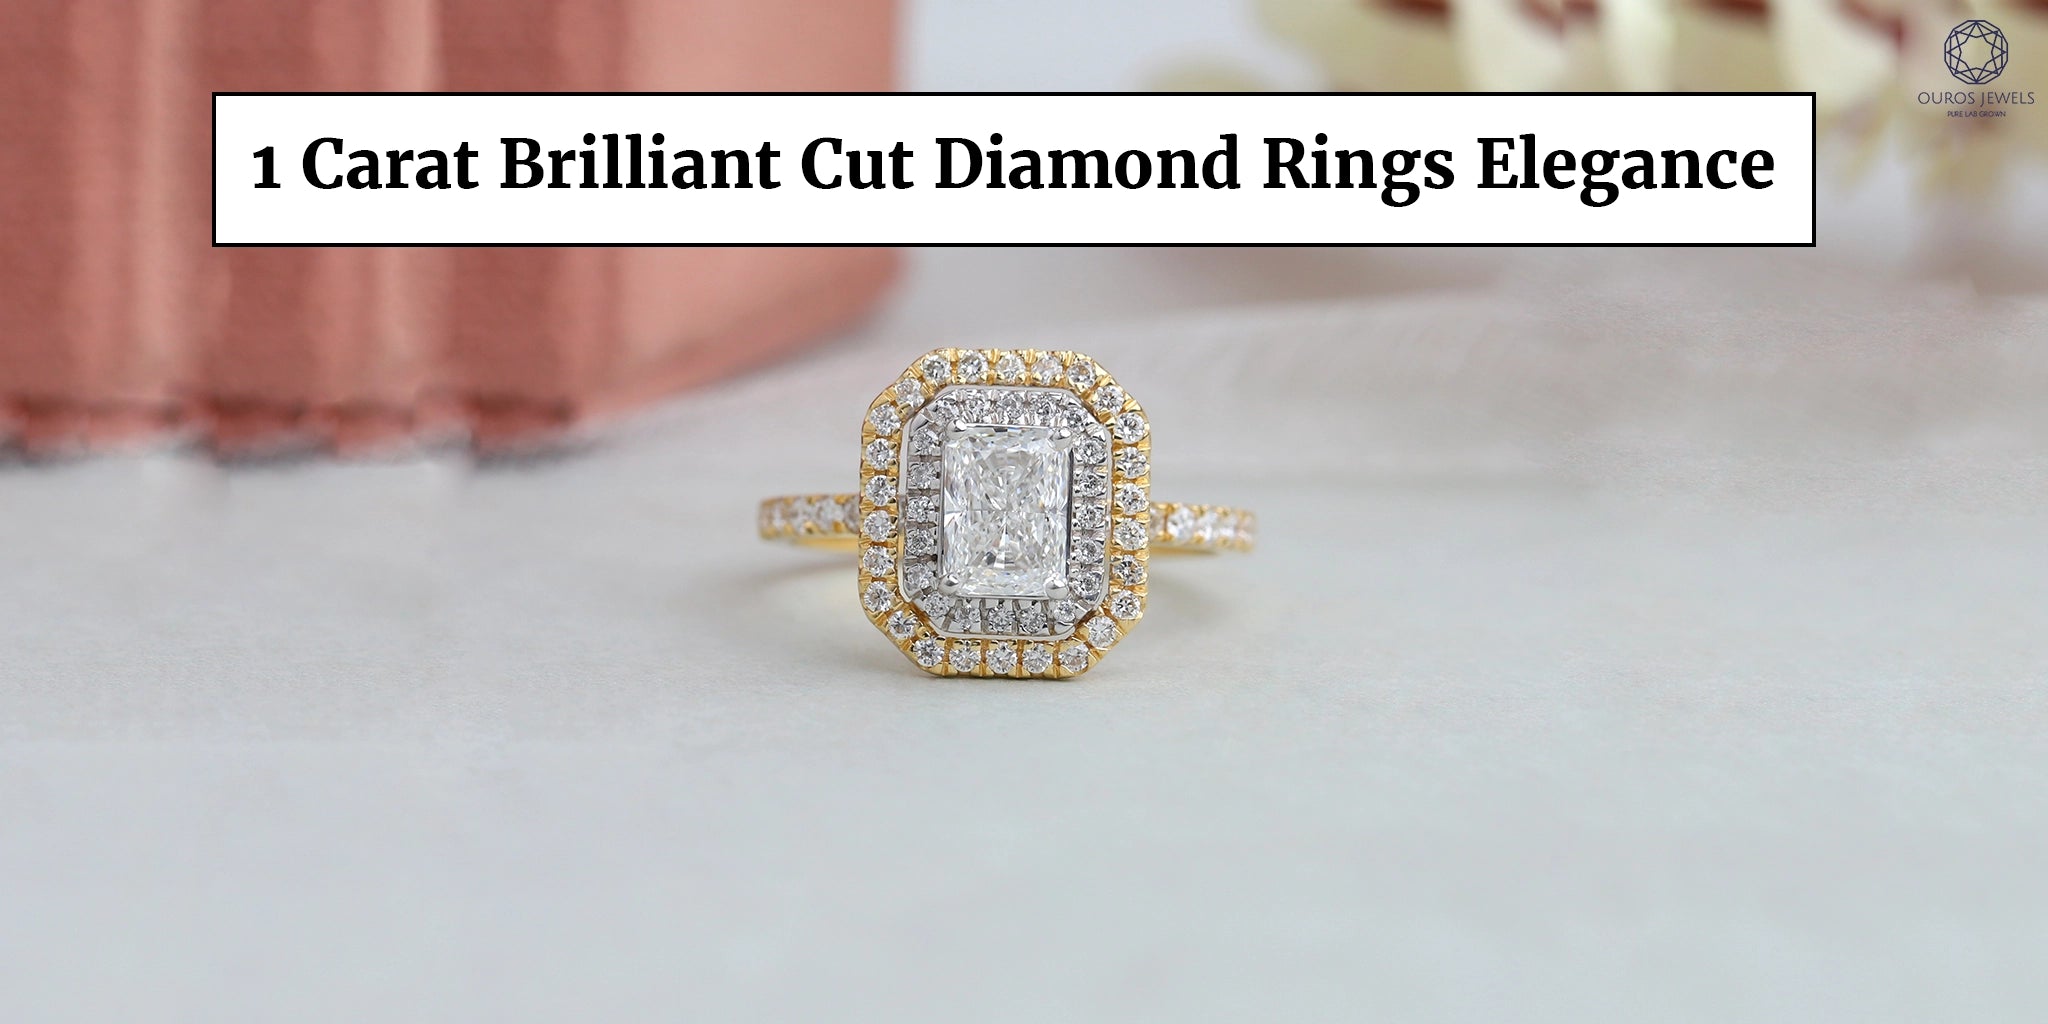 Parts of a Diamond in an Engagement Ring NZ | Four Words